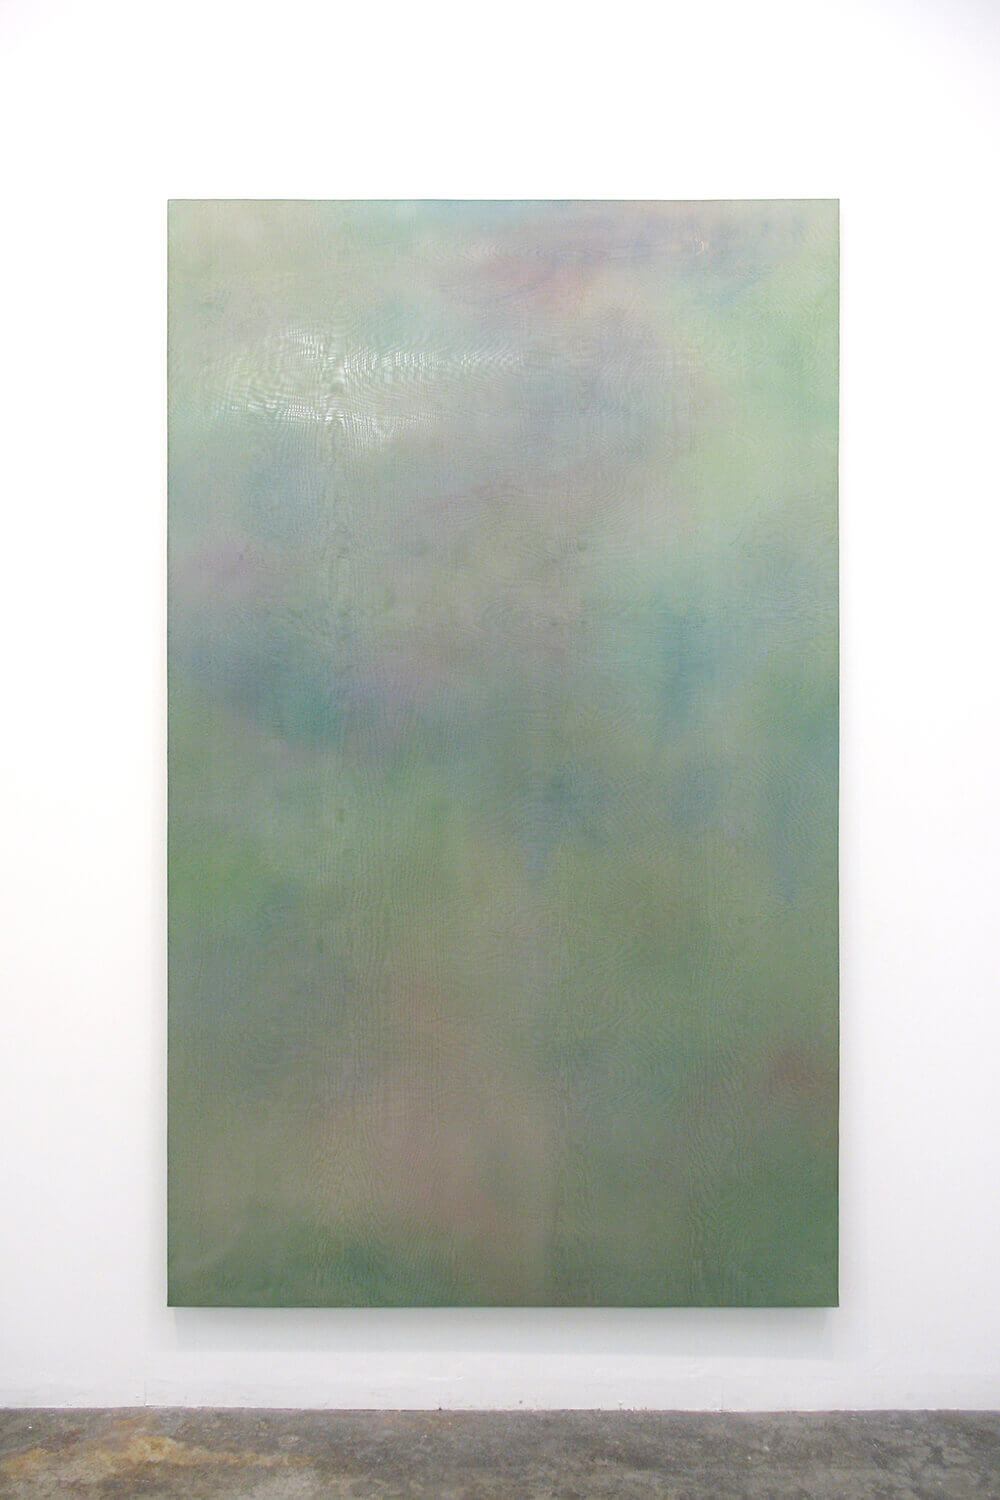 Untitled<br>
Acrylic, glass organdy, stainless steel, panel 200 x 12 cm 2012<br>
VOCA出展作